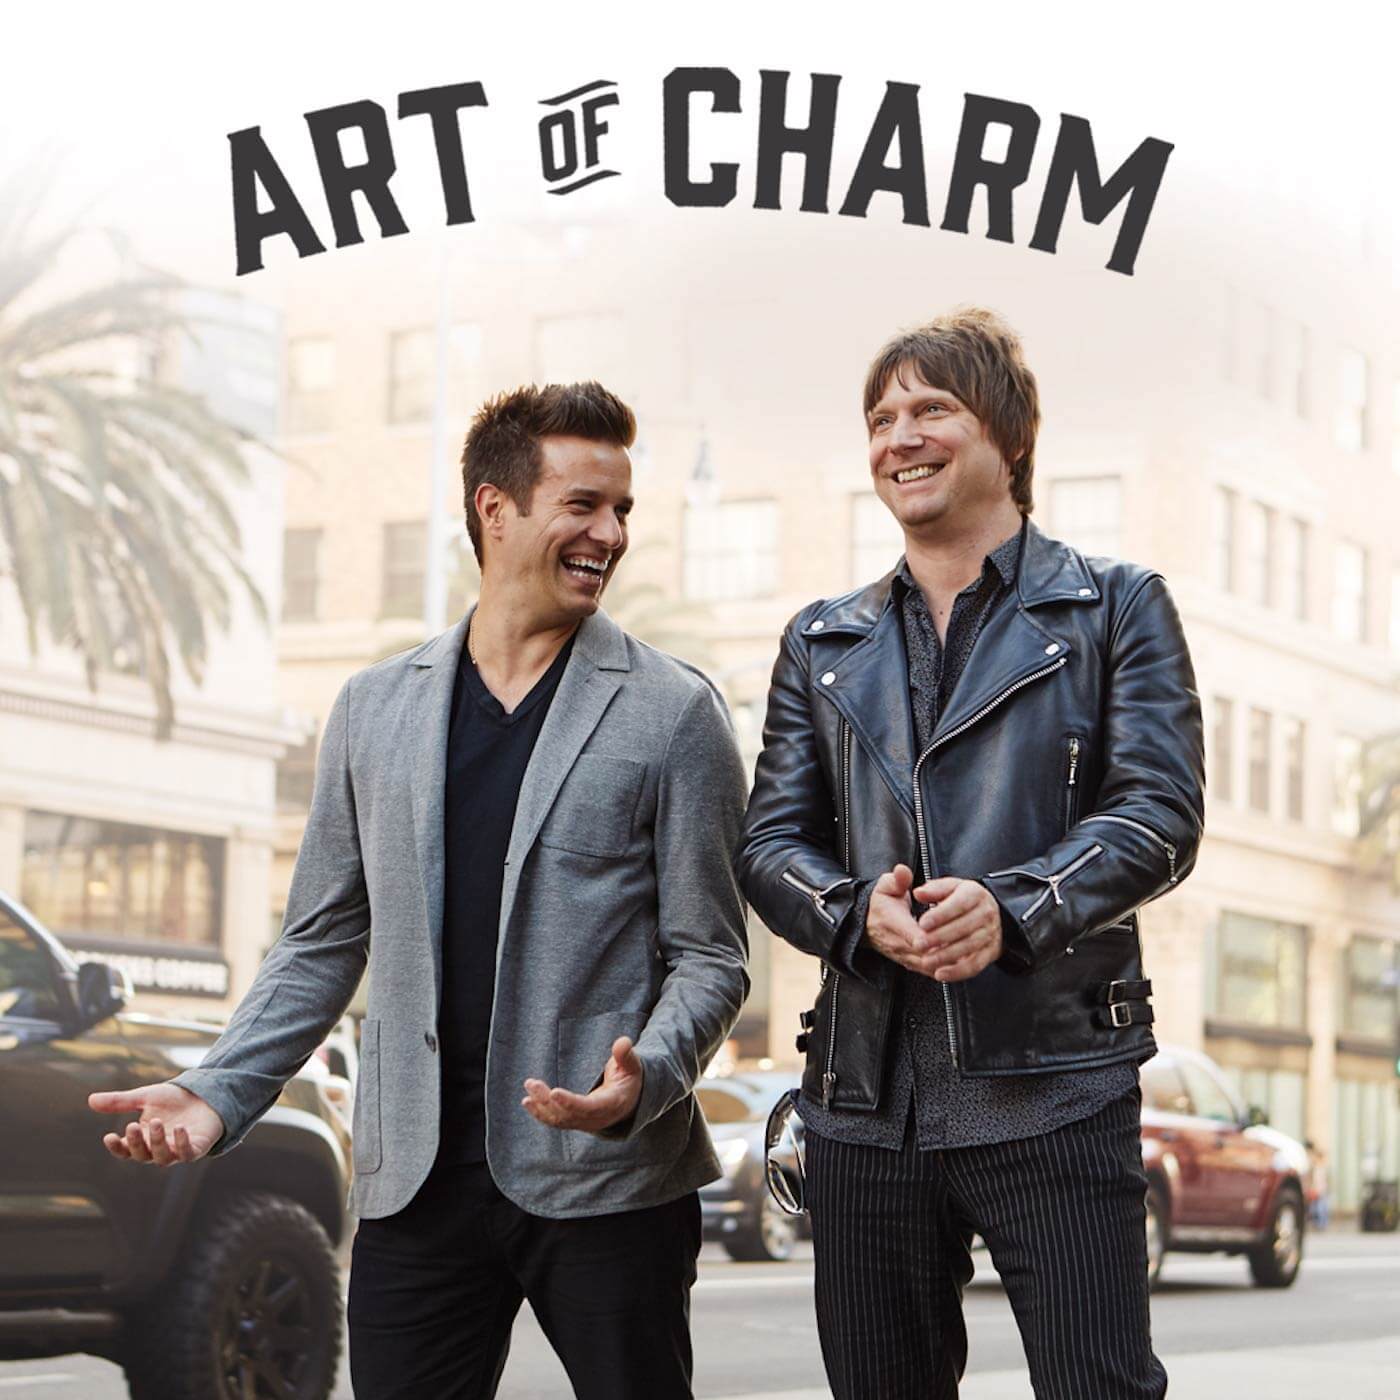 3) The Art of Charm